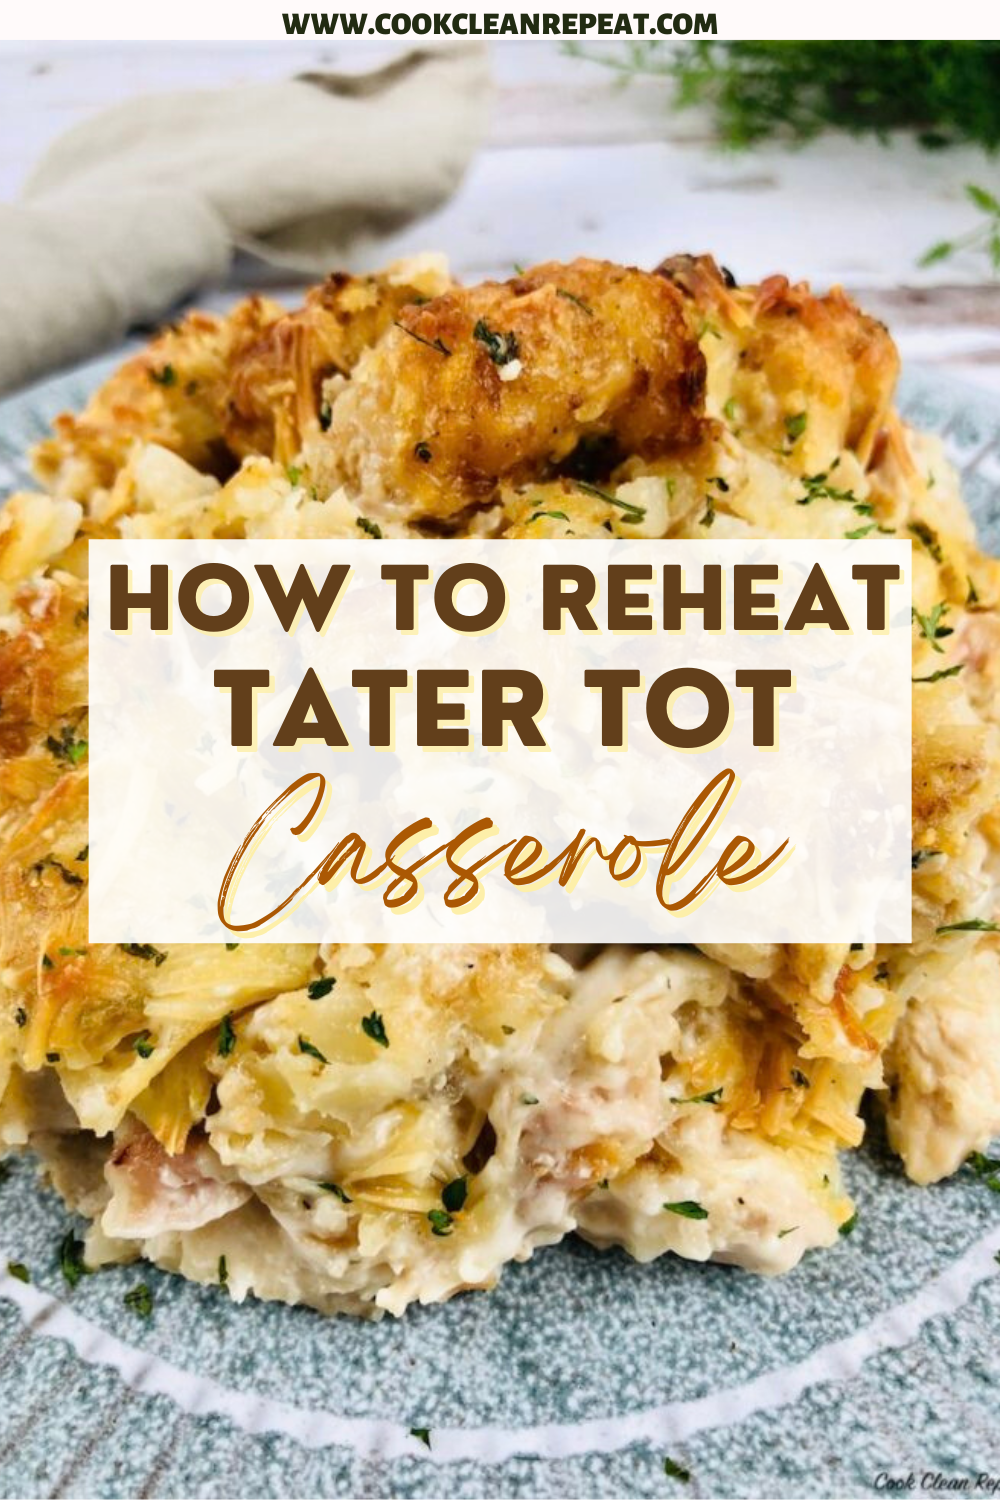 Pin showing the title How to Reheat Tater Tot Casserole